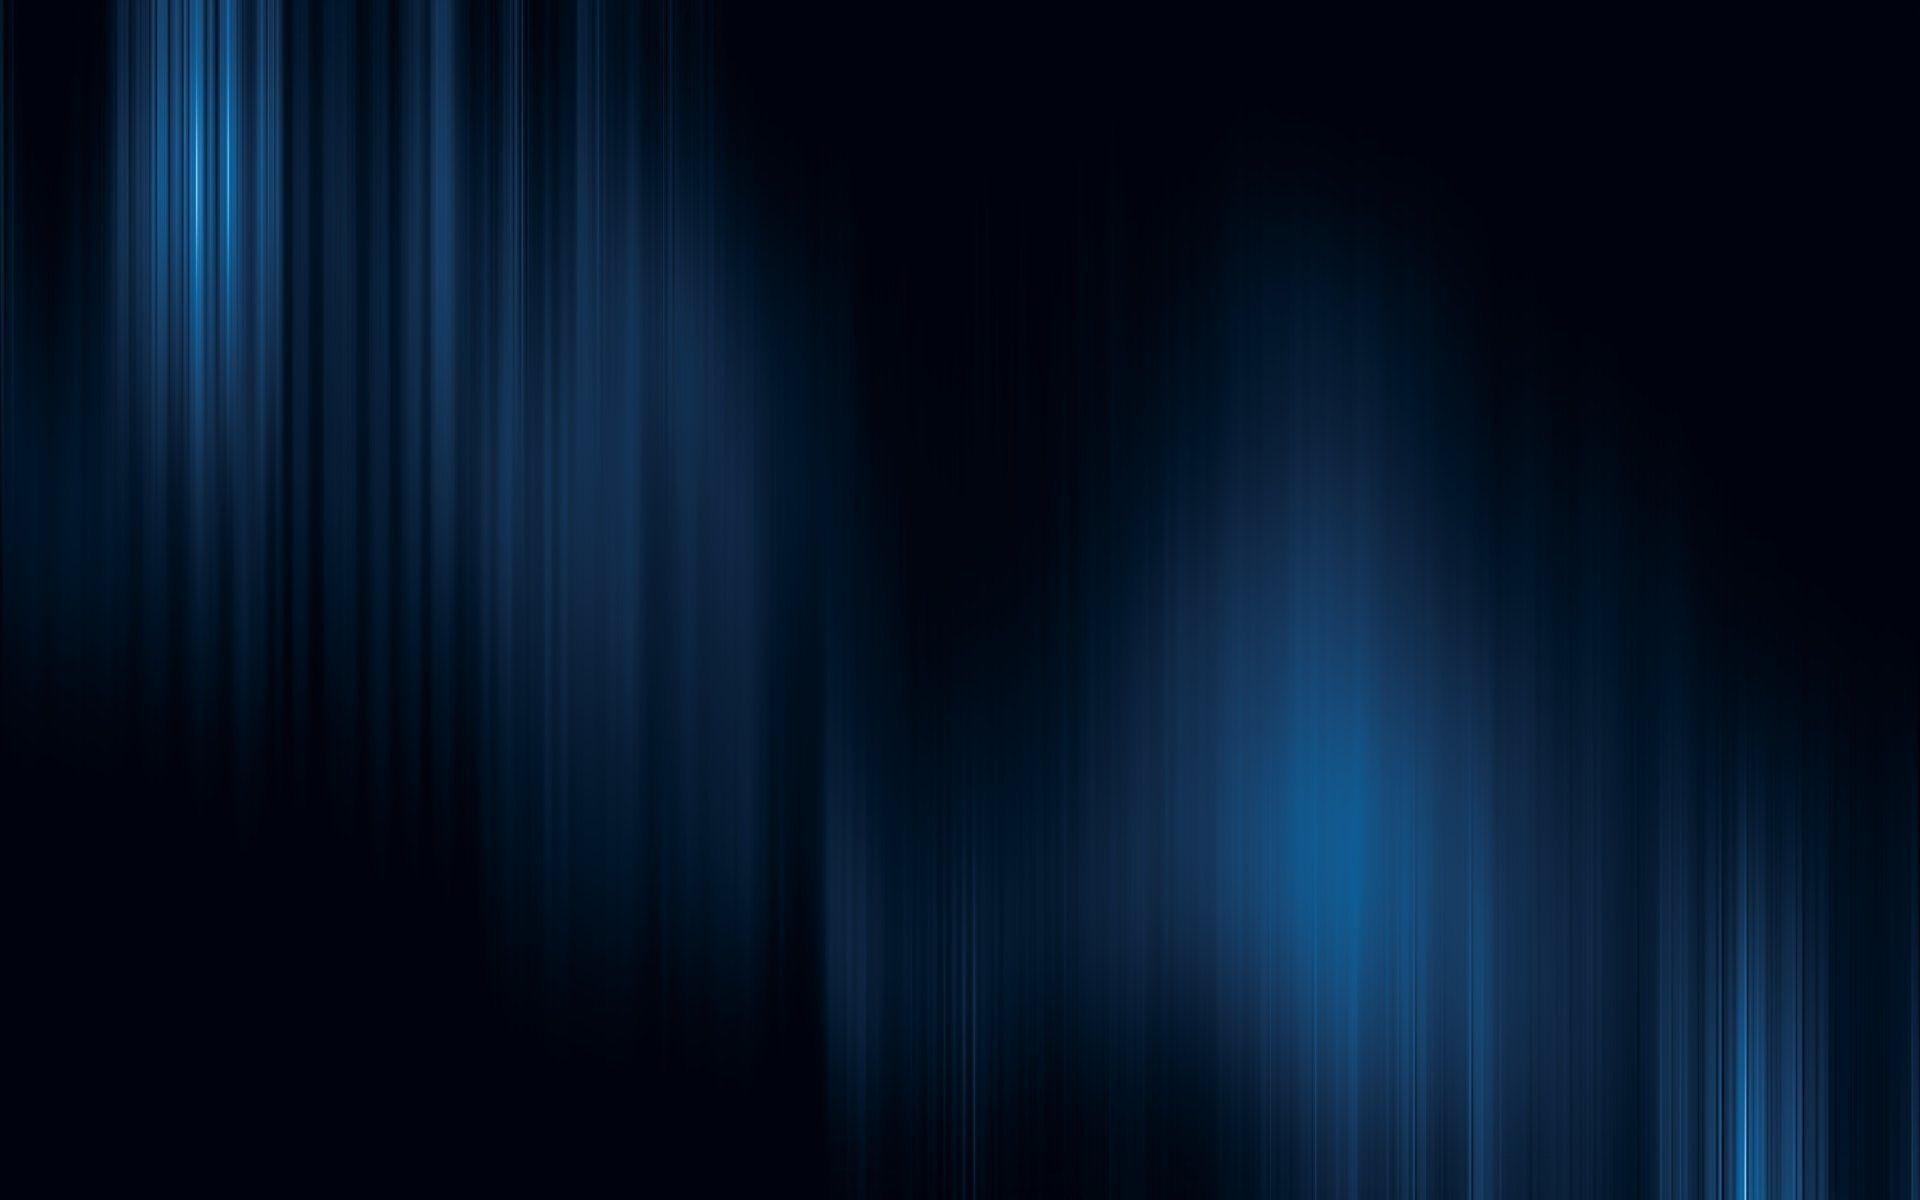 Cool Black And Blue Background. Free Design